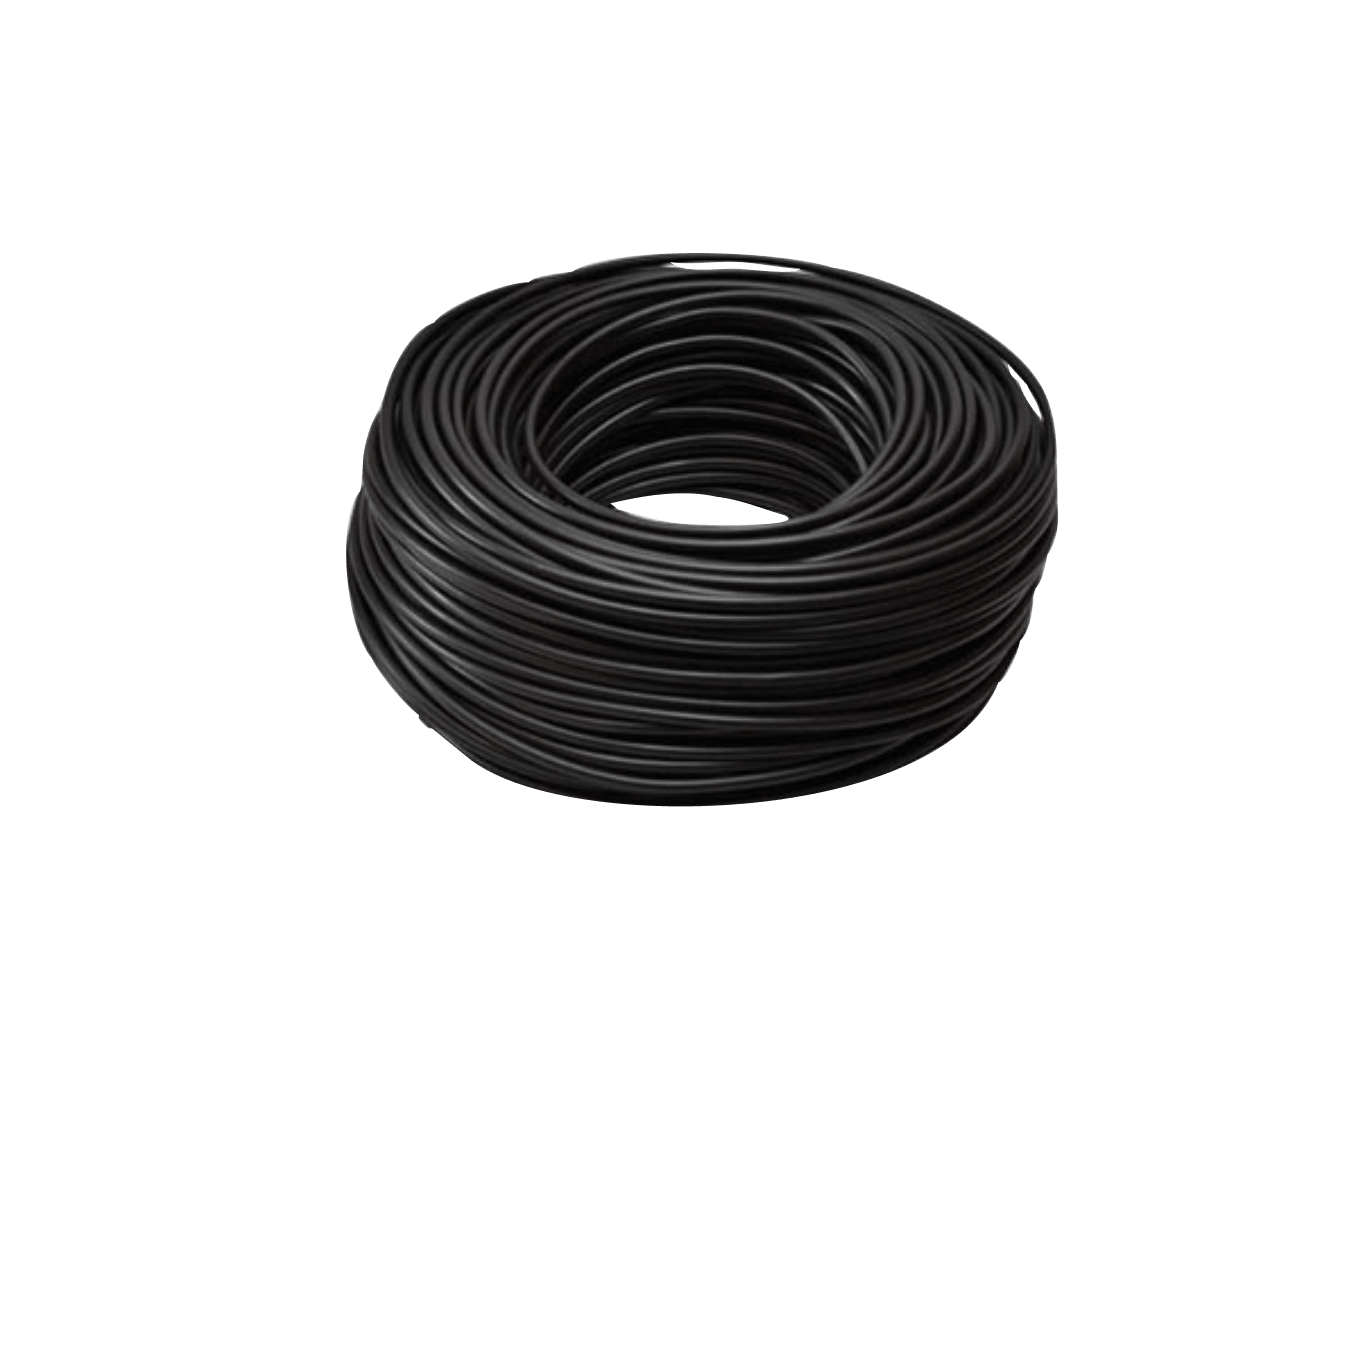 HT CABLE SLIMLINE 100M PER ROLL - NeonSales South Africa